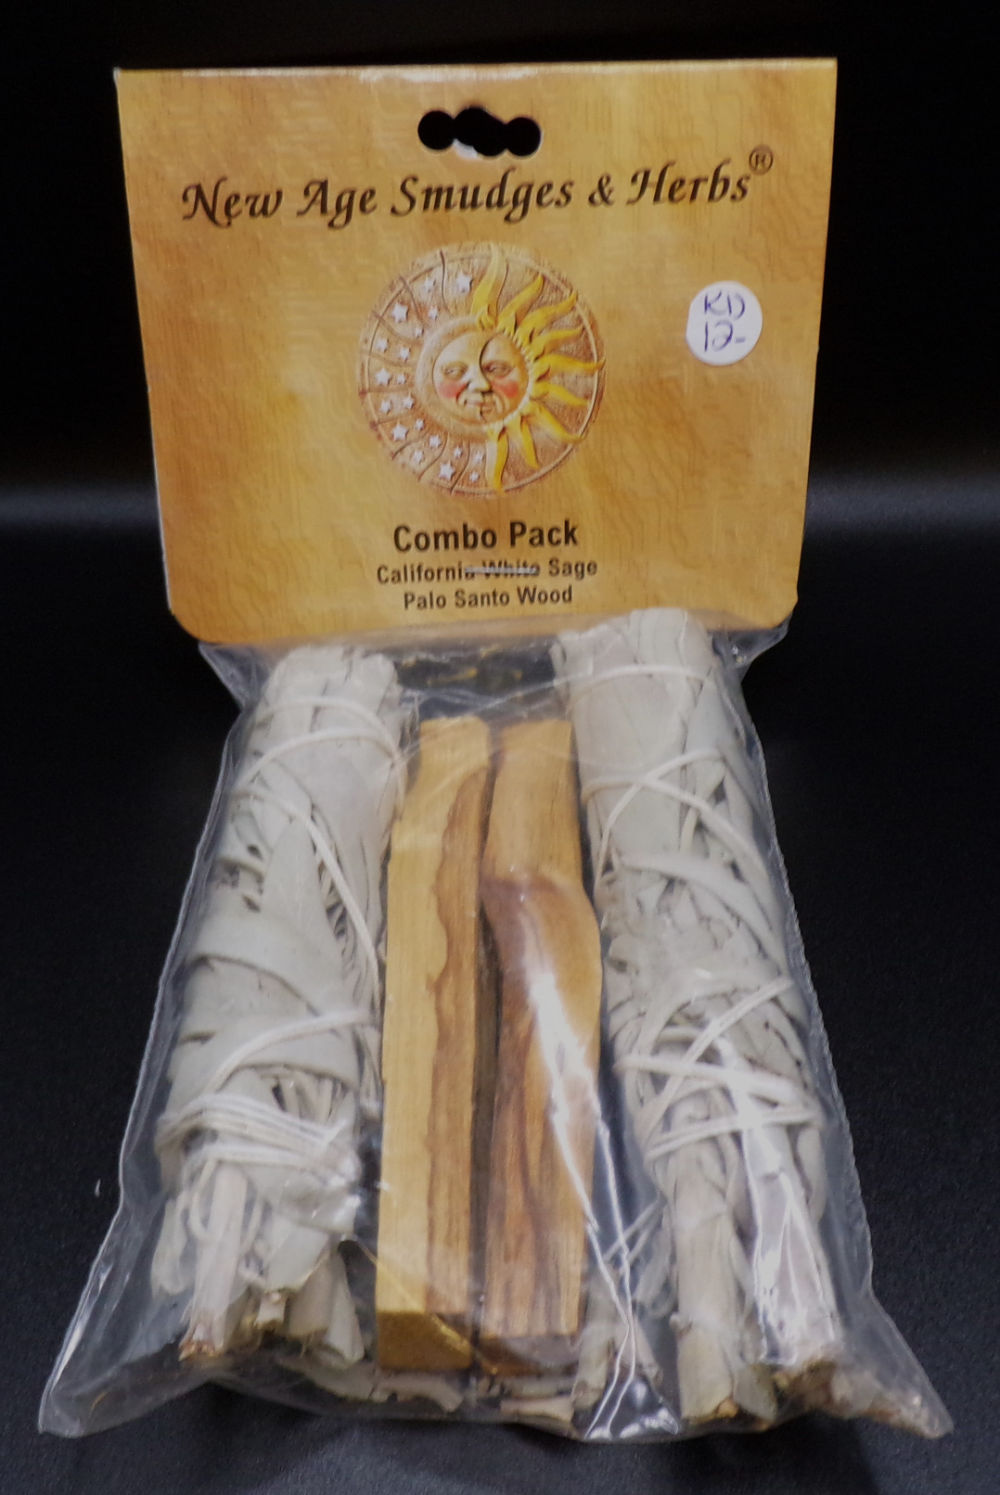 California White Sage and Palo Santo Wood Combo Pack